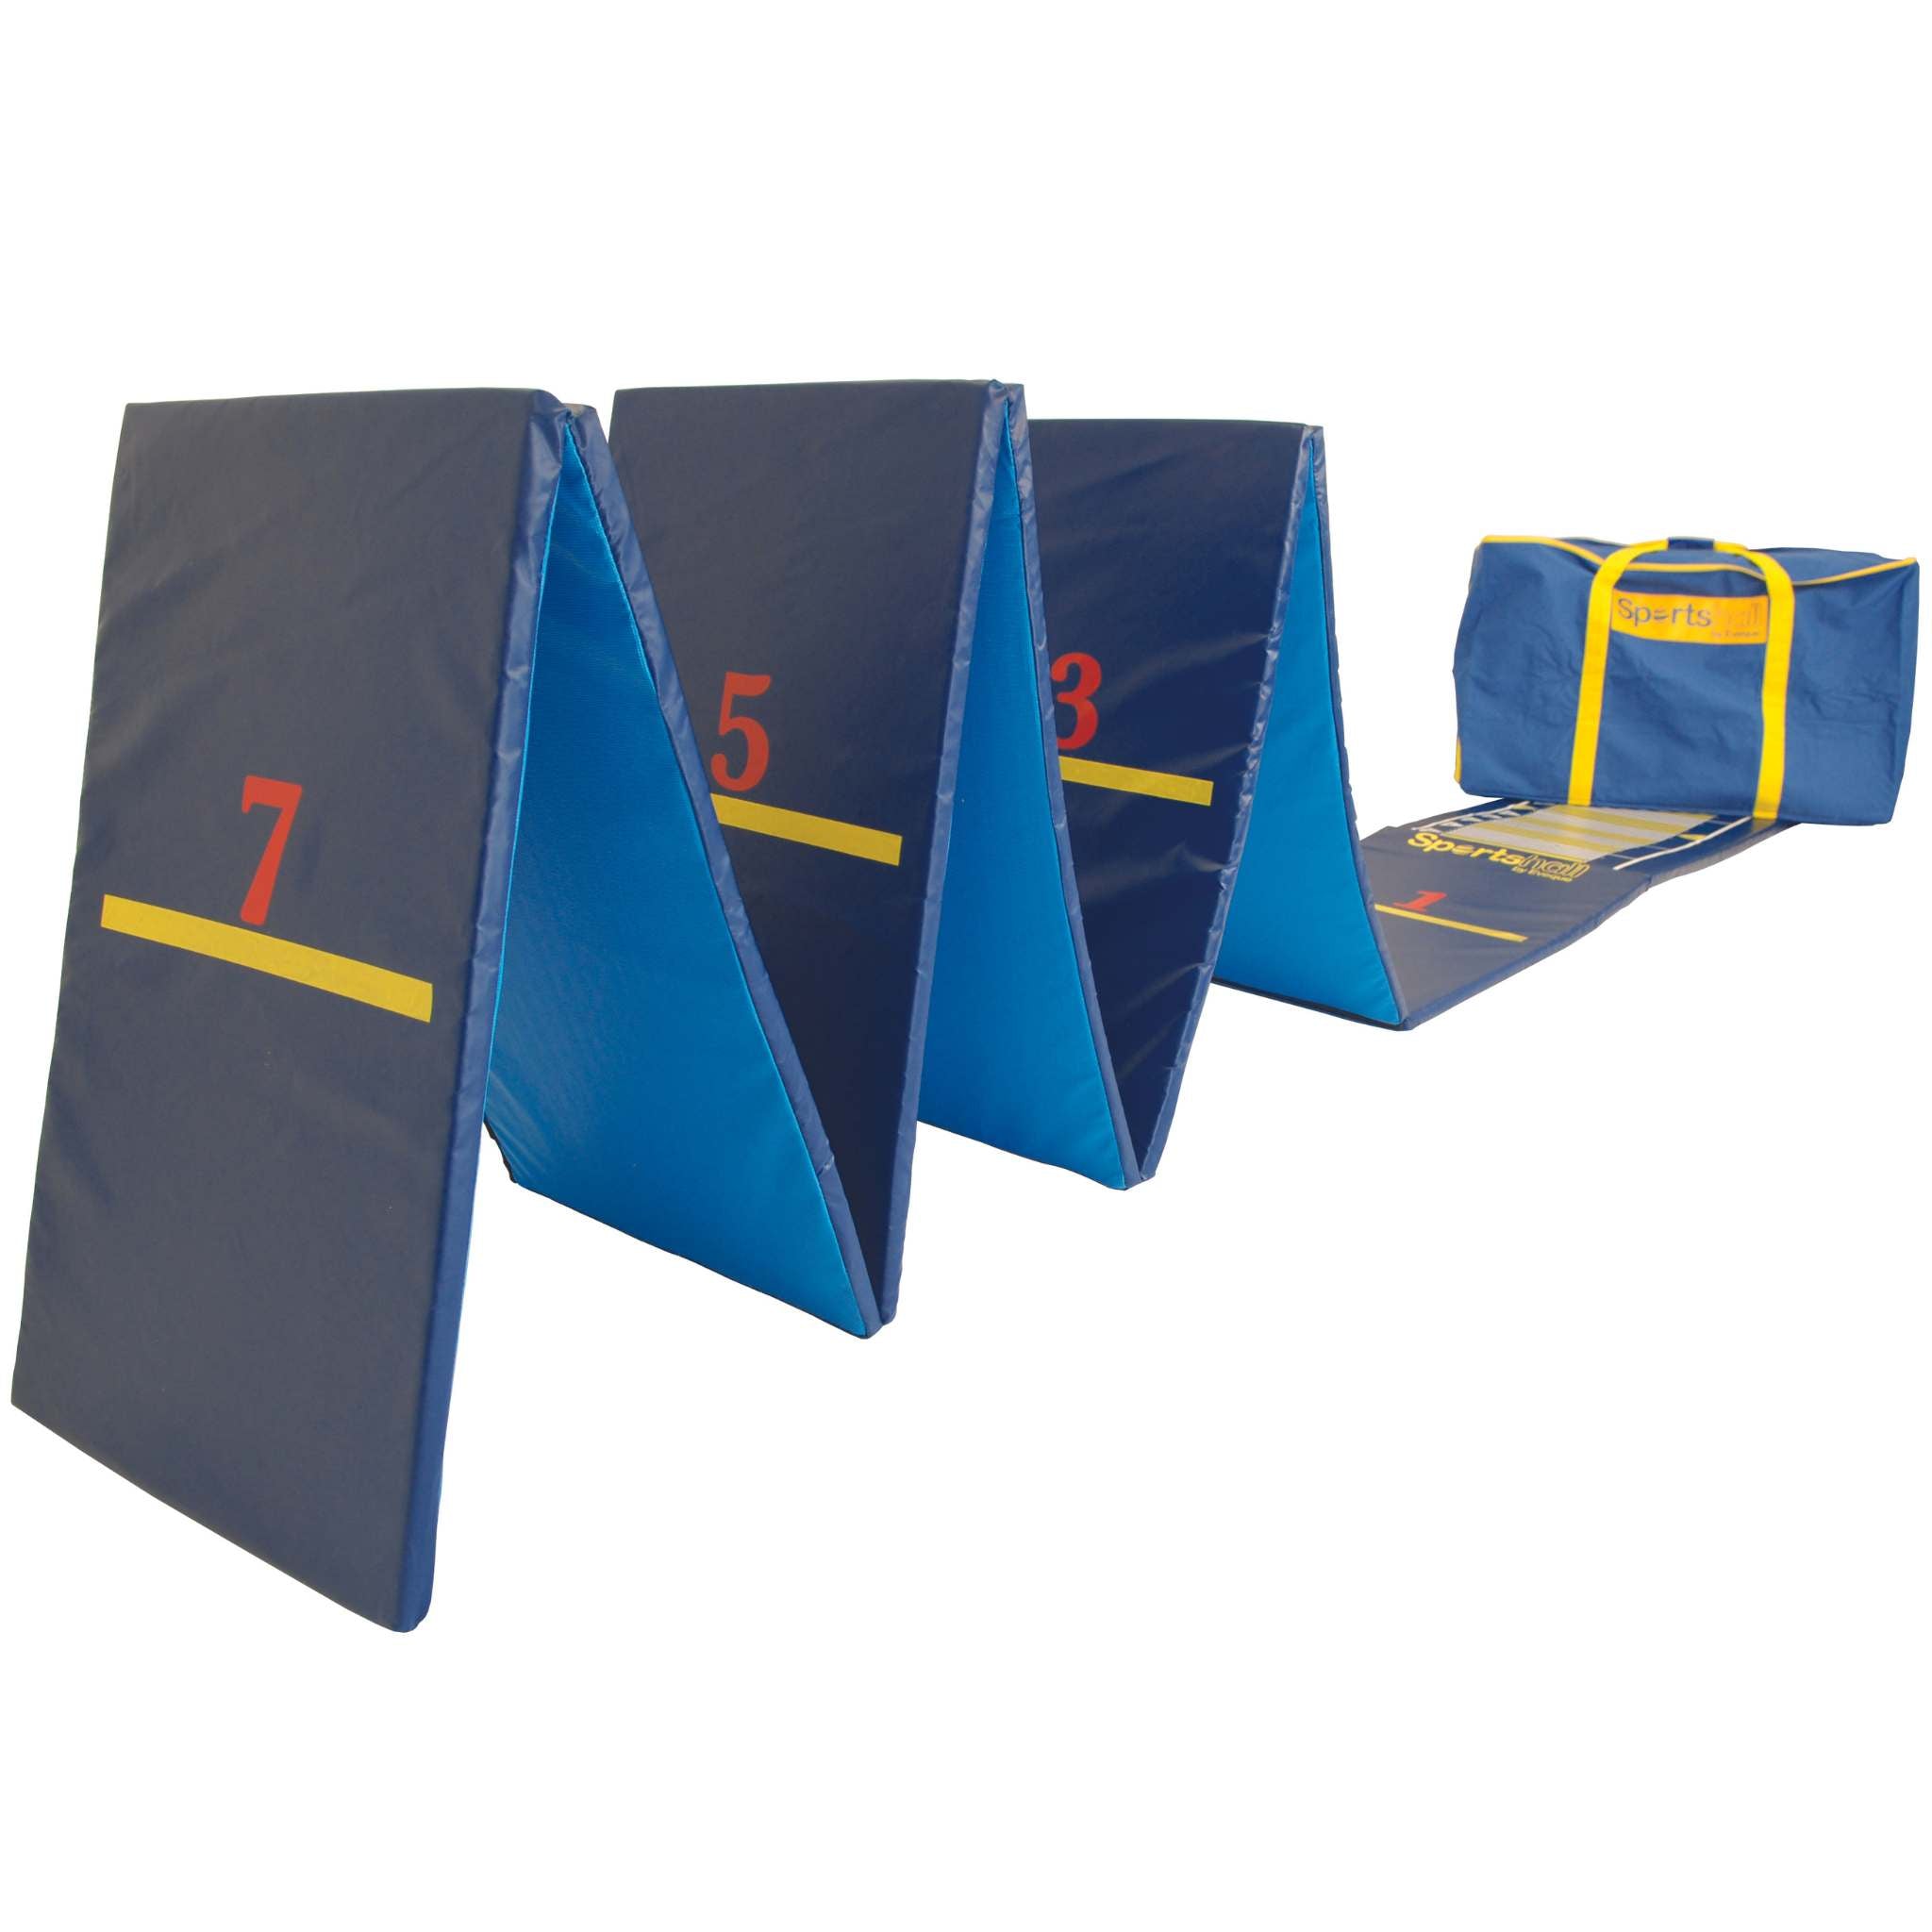 Standing Triple Jump Mat | Eveque Sportshall | 10.5m | Blue and Yellow folding foam mat with bag